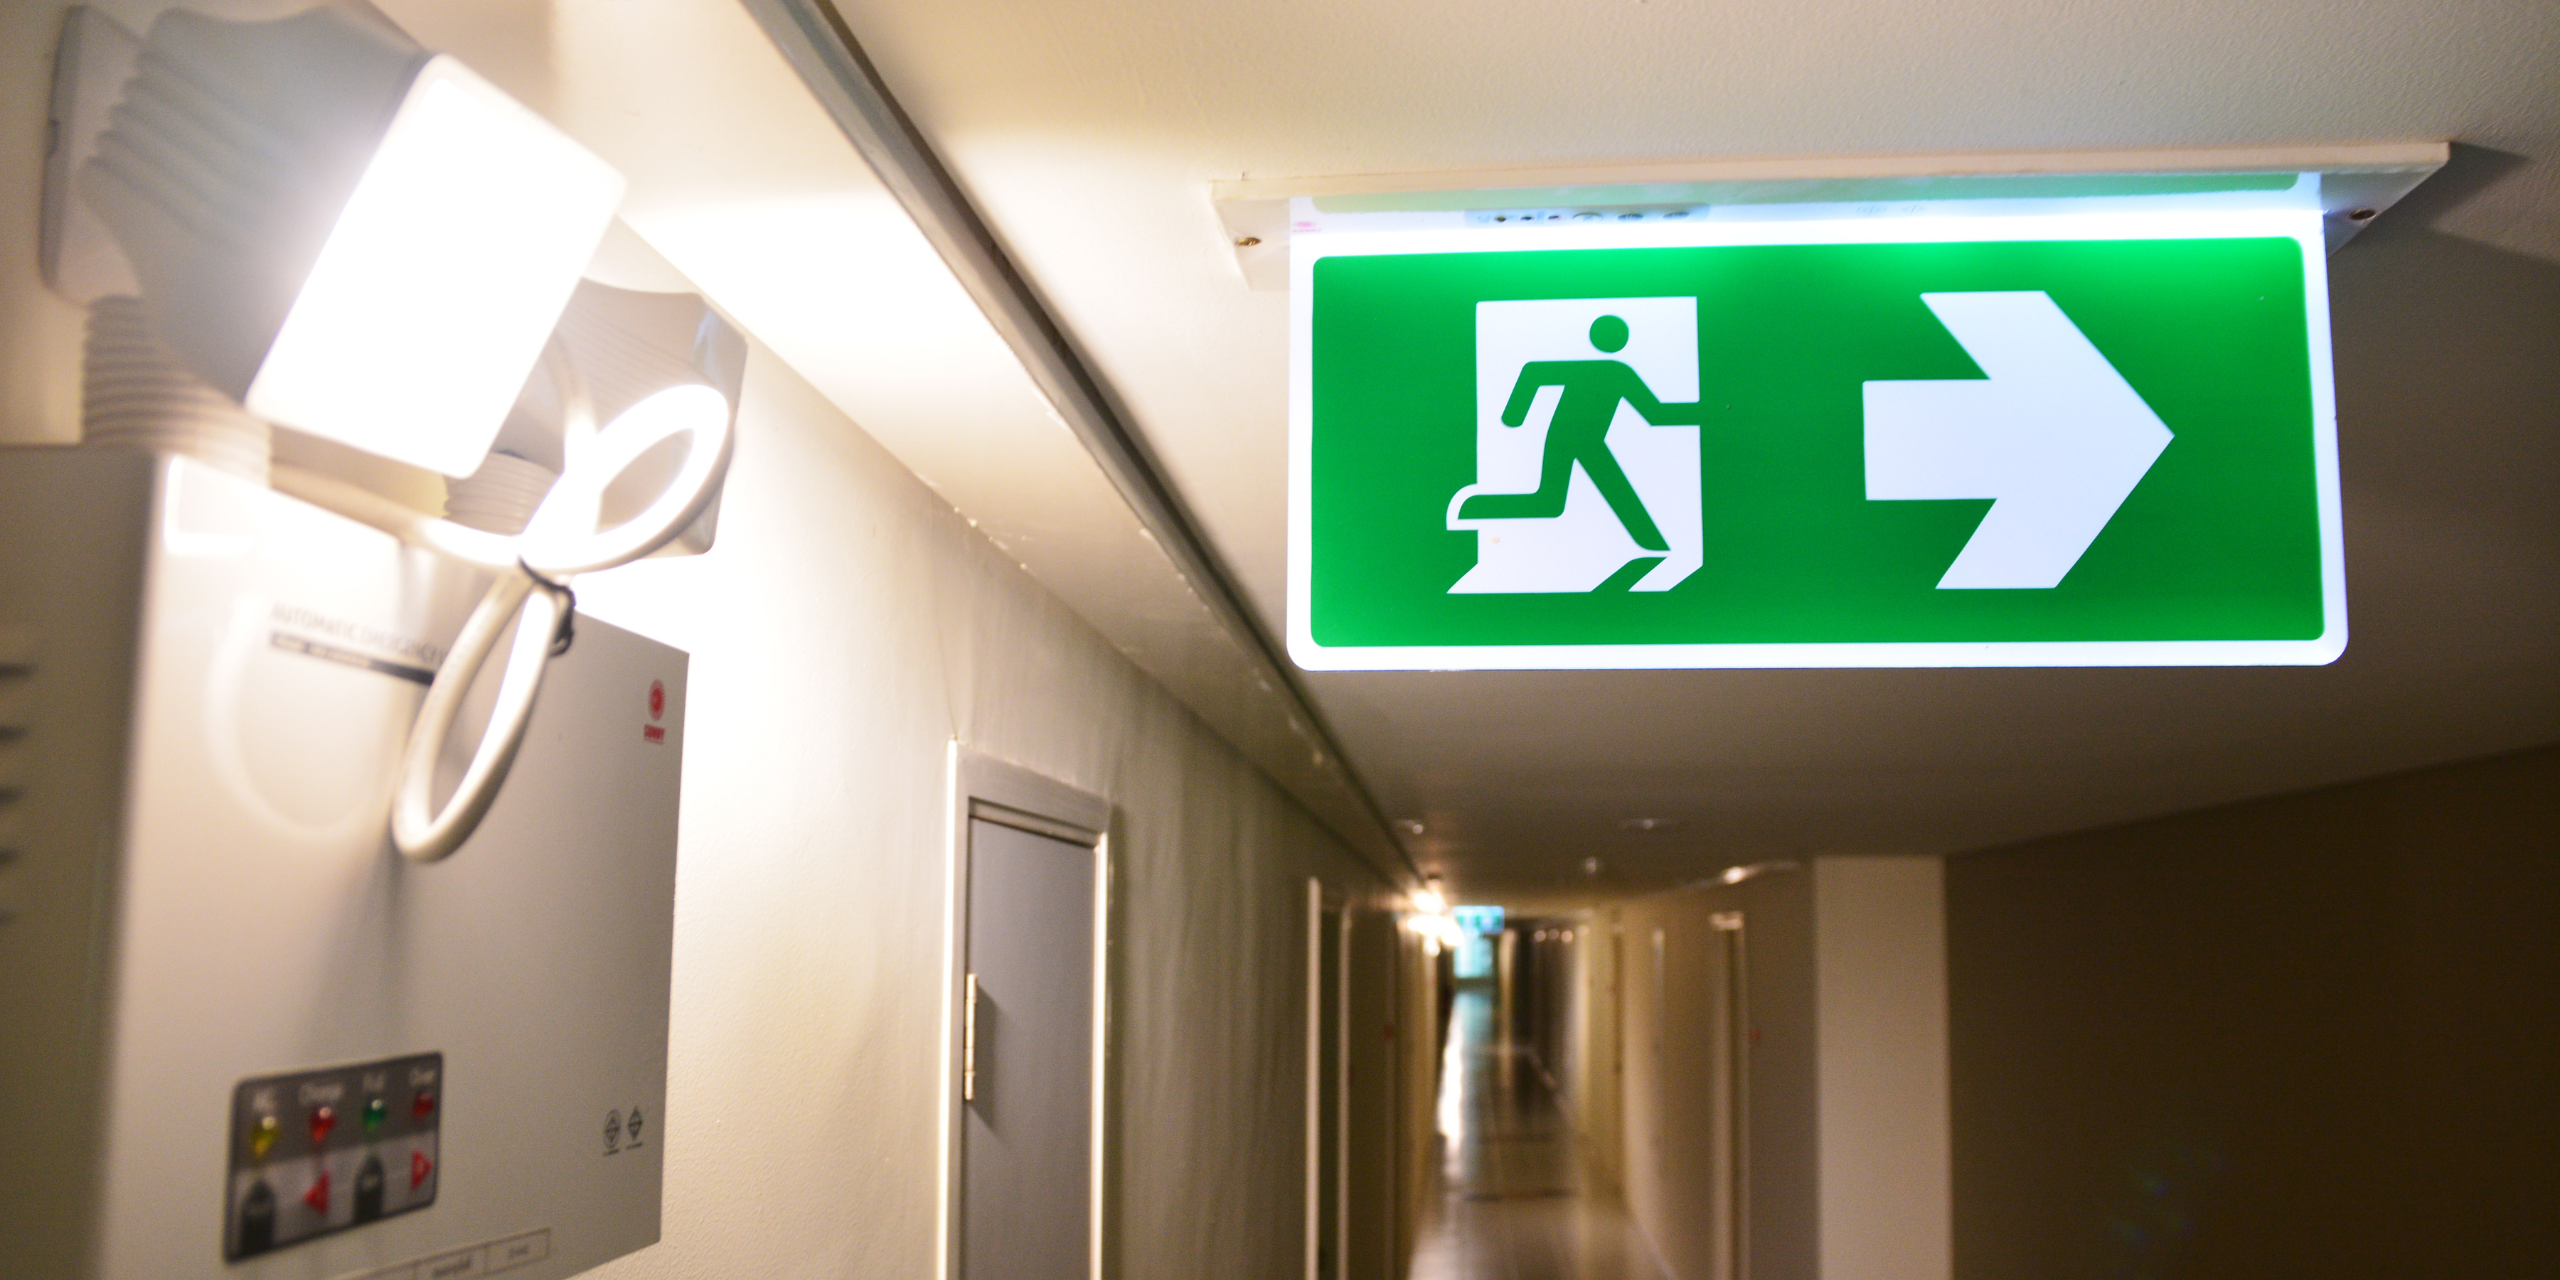 Emergency Lighting for fire safety